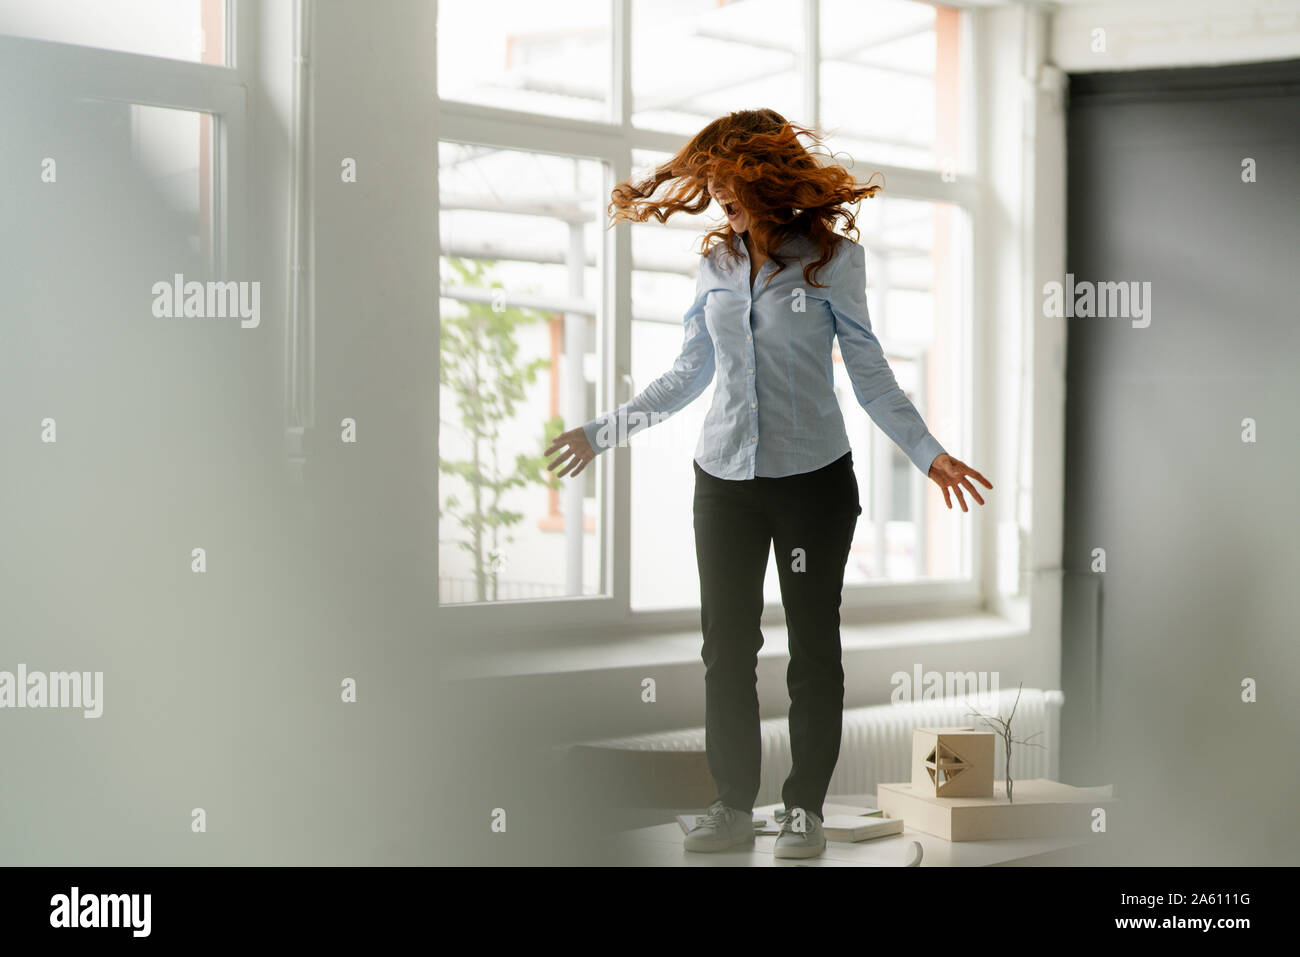 Redheaded woman standing on desk in a loft moving and screaming Stock Photo